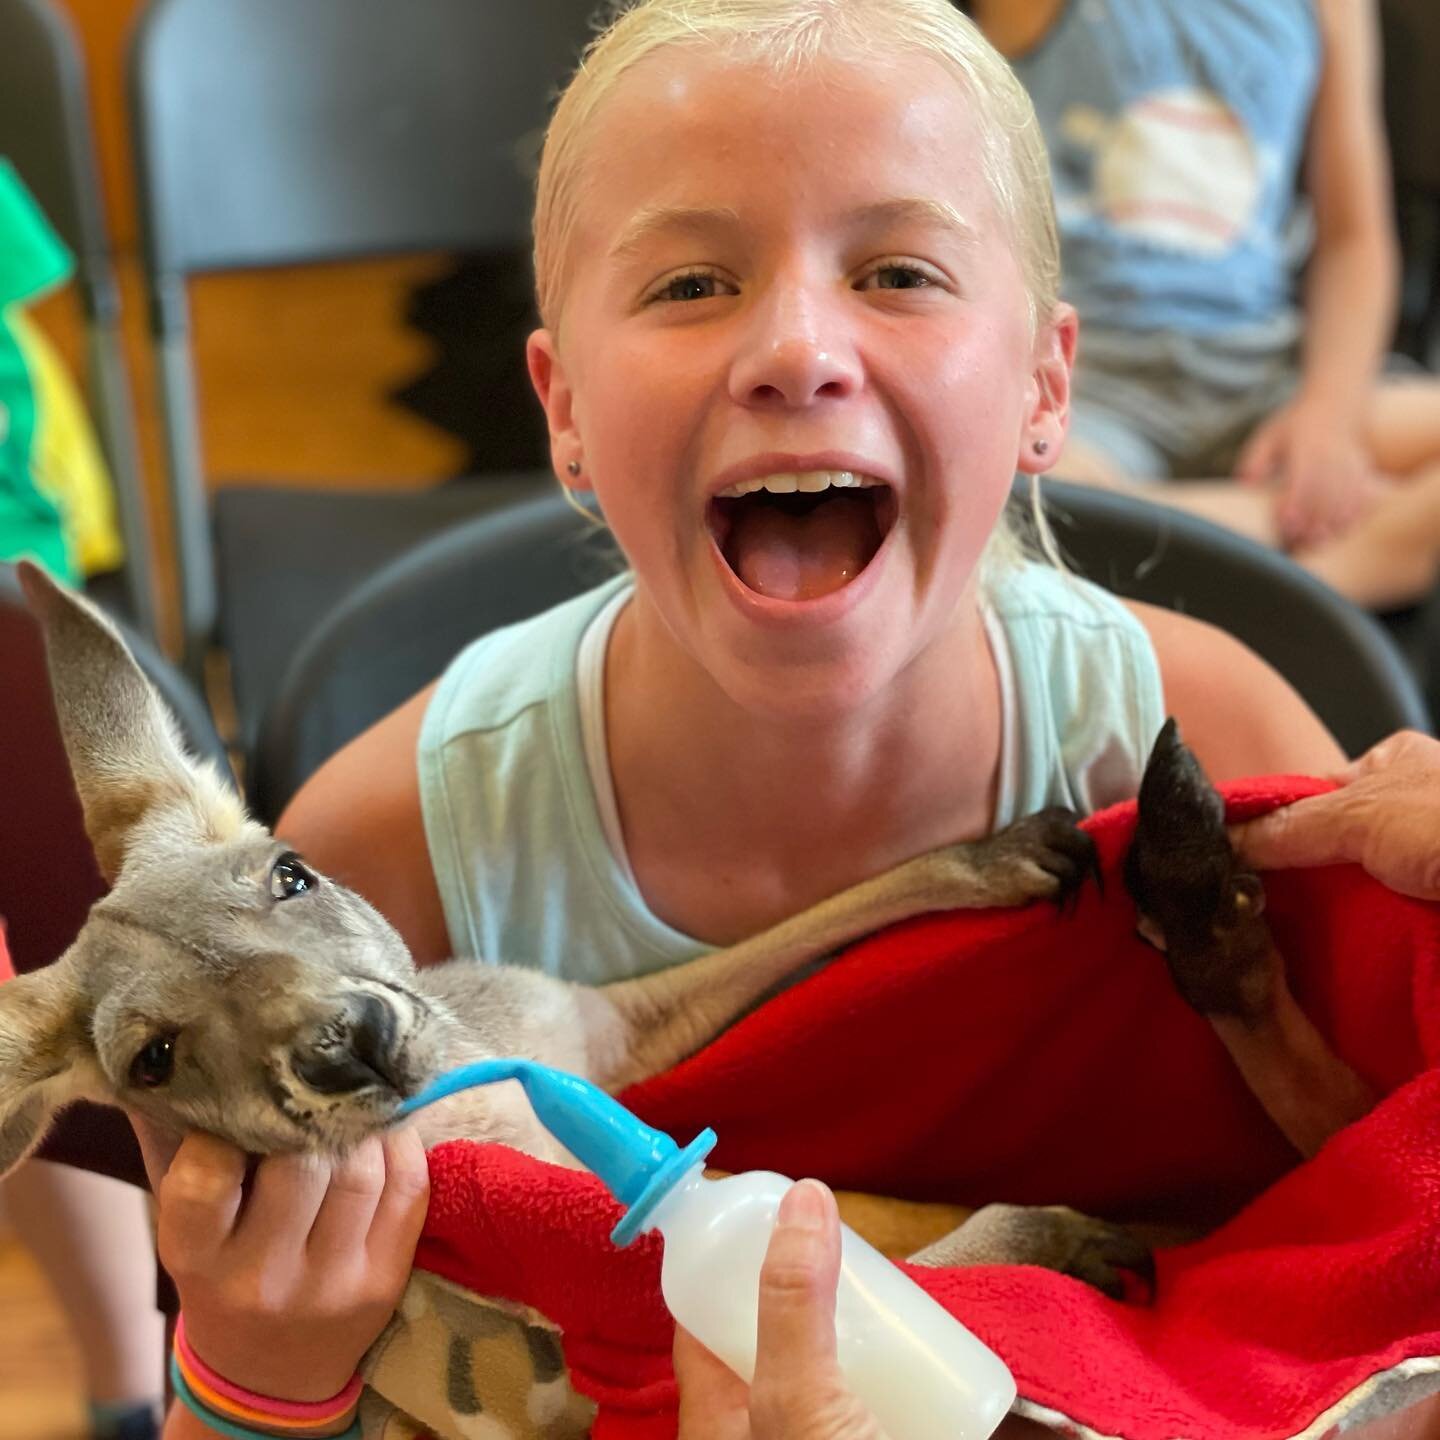 Kangaroo day!  Campers got to meet our Roos today and they had a great time! 🦘. Campers also got to meet a prairie dog, milk snake, owl, blue and gold macaw and a tortoise!  Tons more animals ambassadors to meet tomorrow!

#omaha #nebraska #wildlife